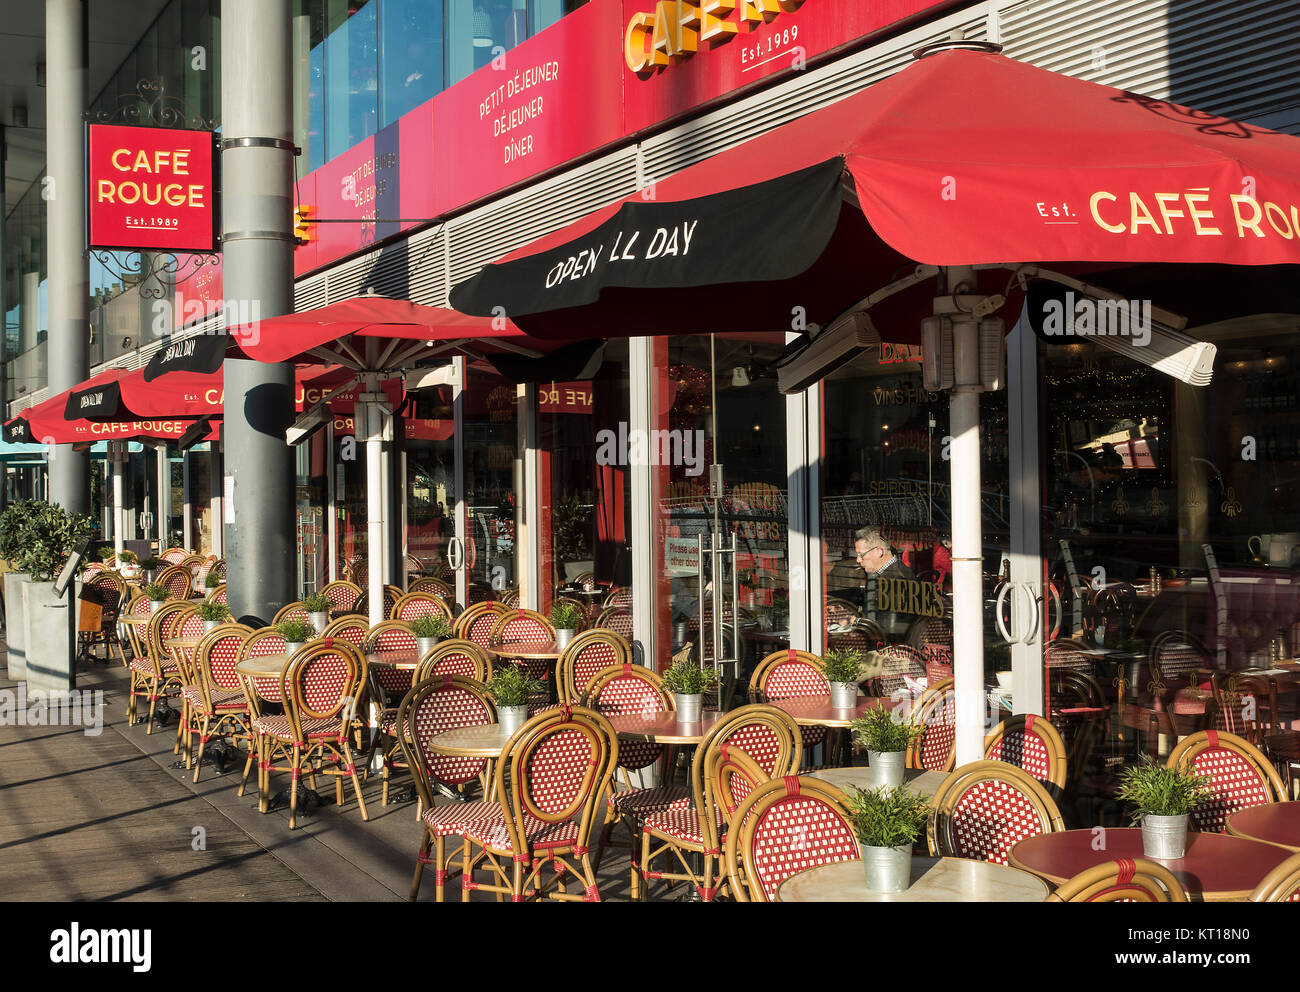 External View of Café Rouge Restaurant with Red Umbrellas and Outside Tables on a Sunny Day at St Katharine Dock London England United Kingdom UK Stock Photo